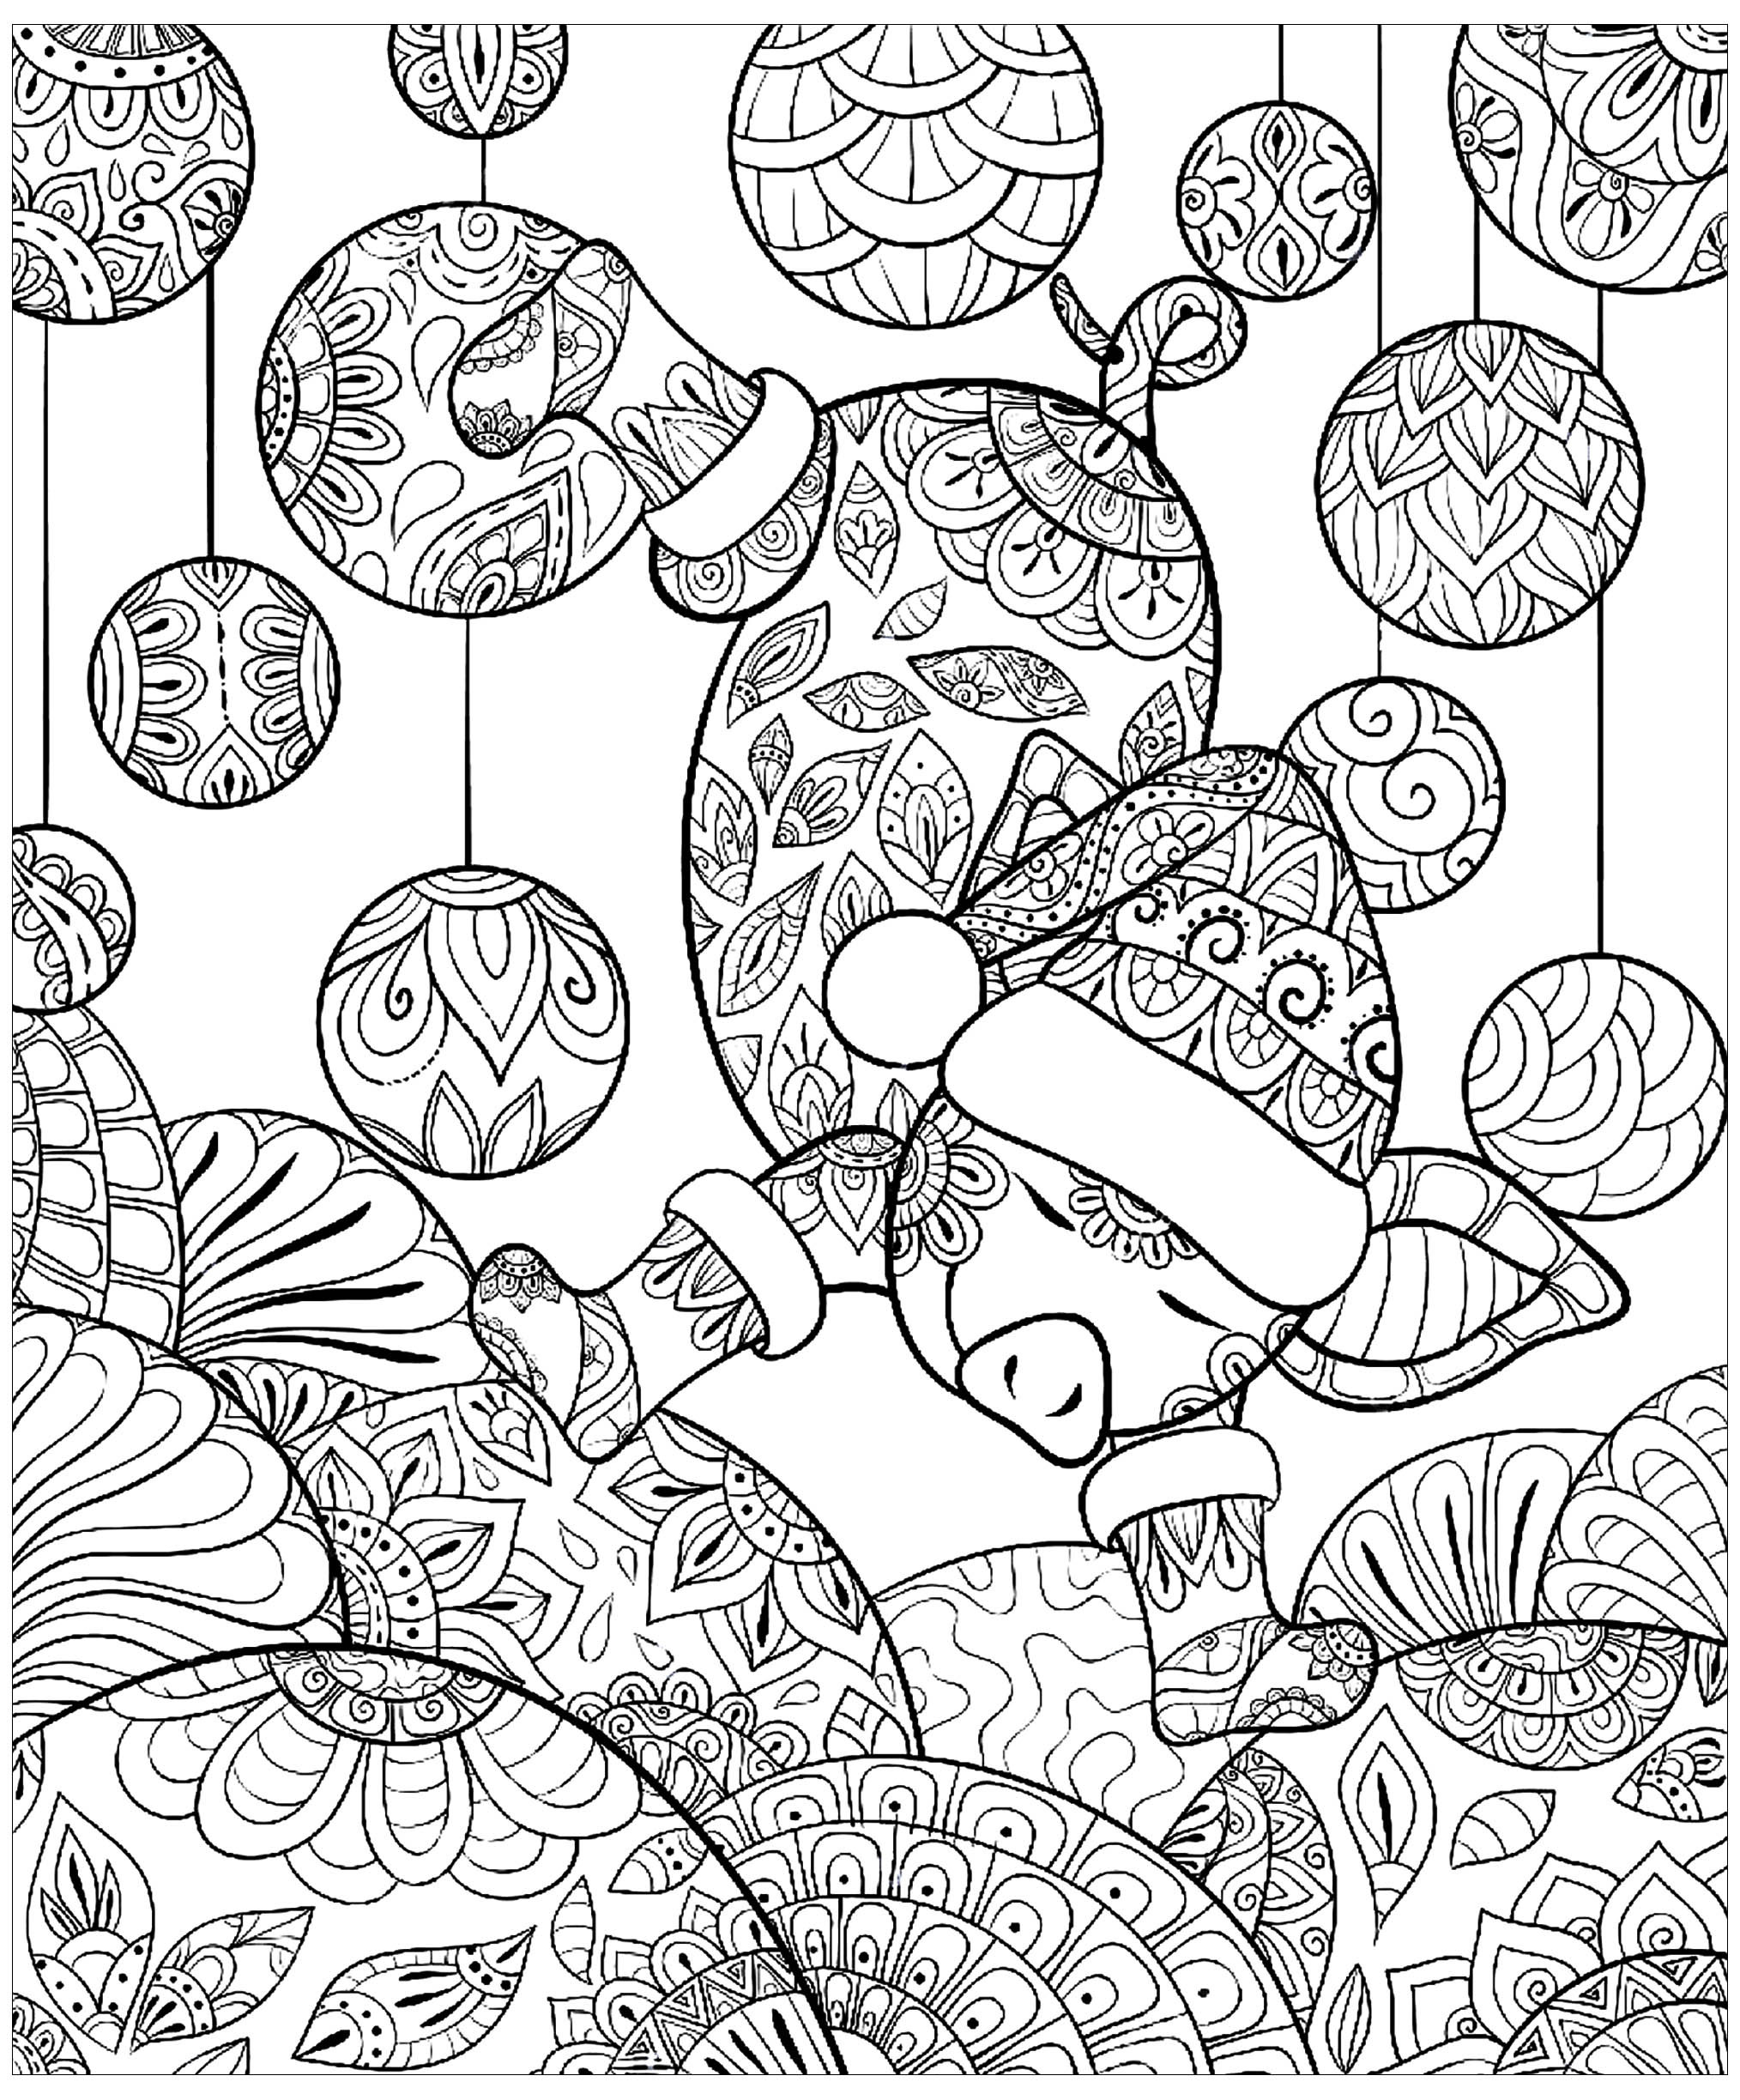 Pig Coloring Pages For Adults
 Pig christmas zentangle Pigs Adult Coloring Pages